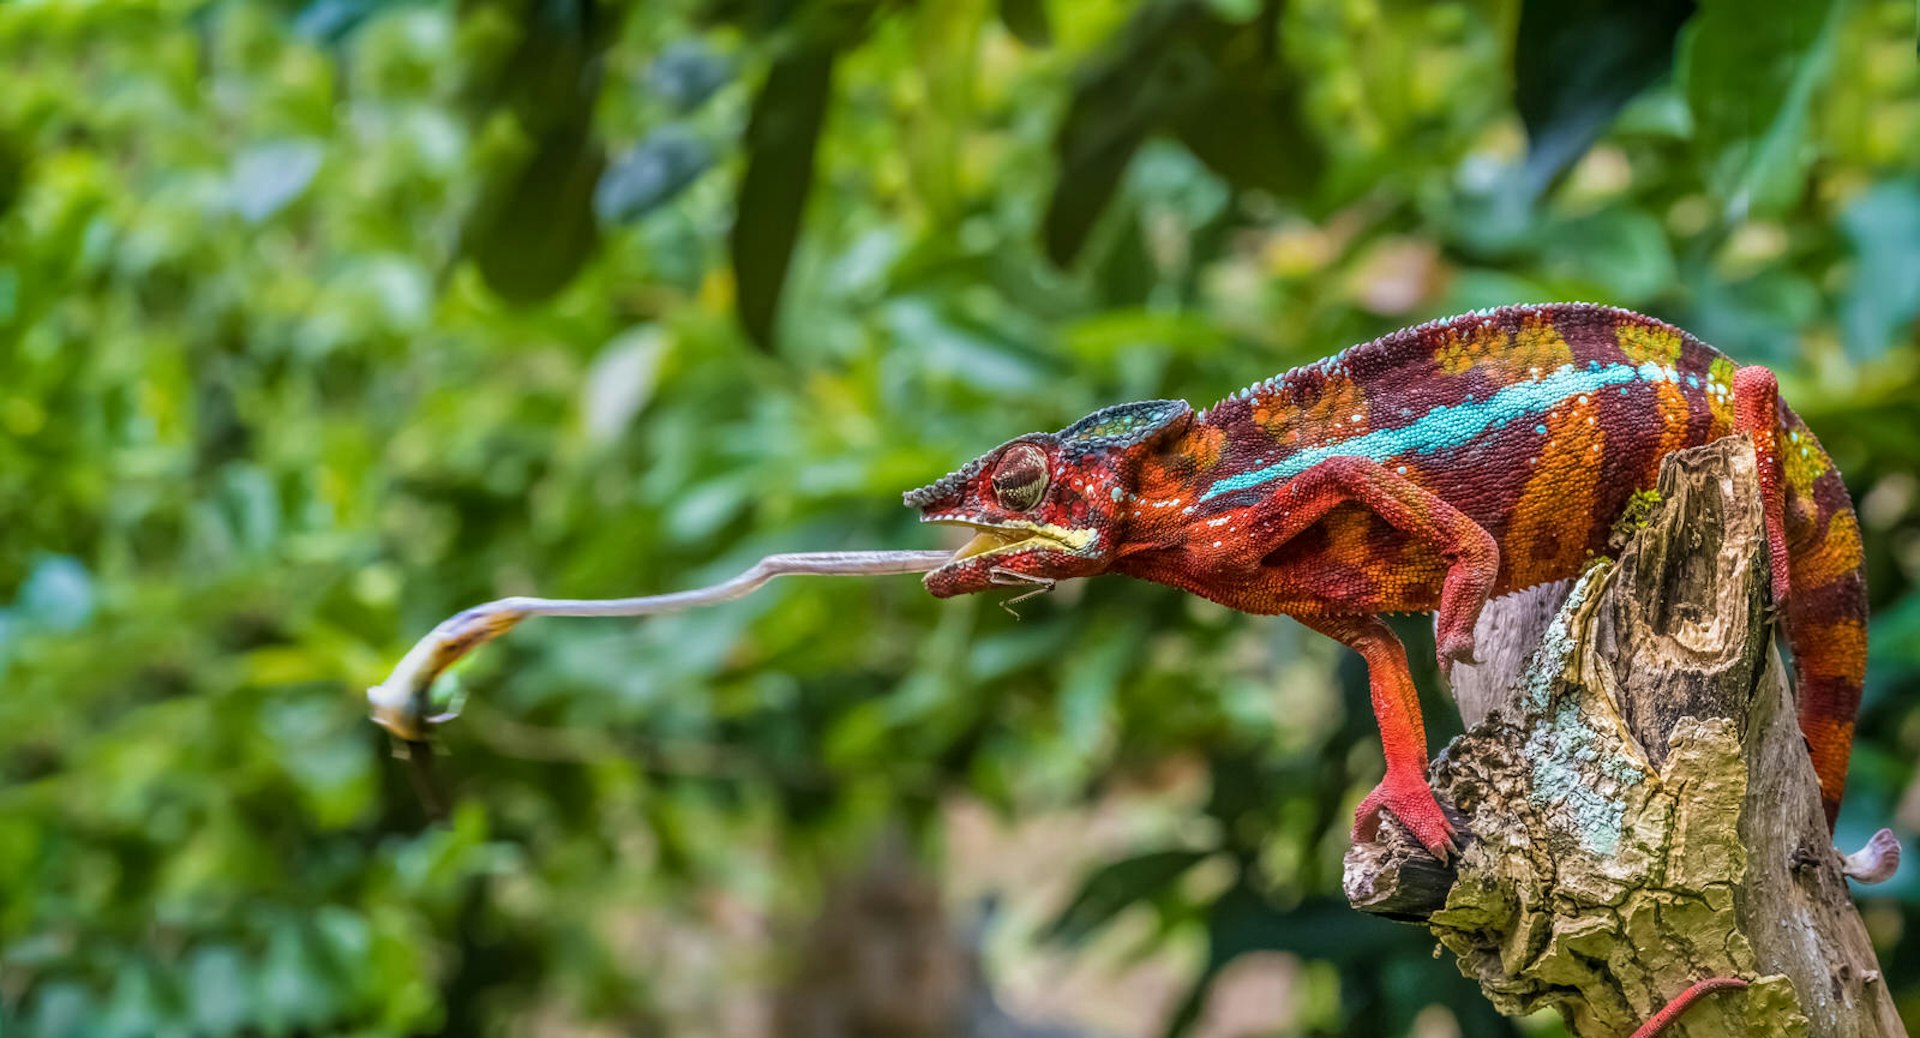 A chameleon, primarily red and orange but with a bright blue streak, shoots out its tongue to catch an insect in Andasibe-Mantadia National Park, Madagascar